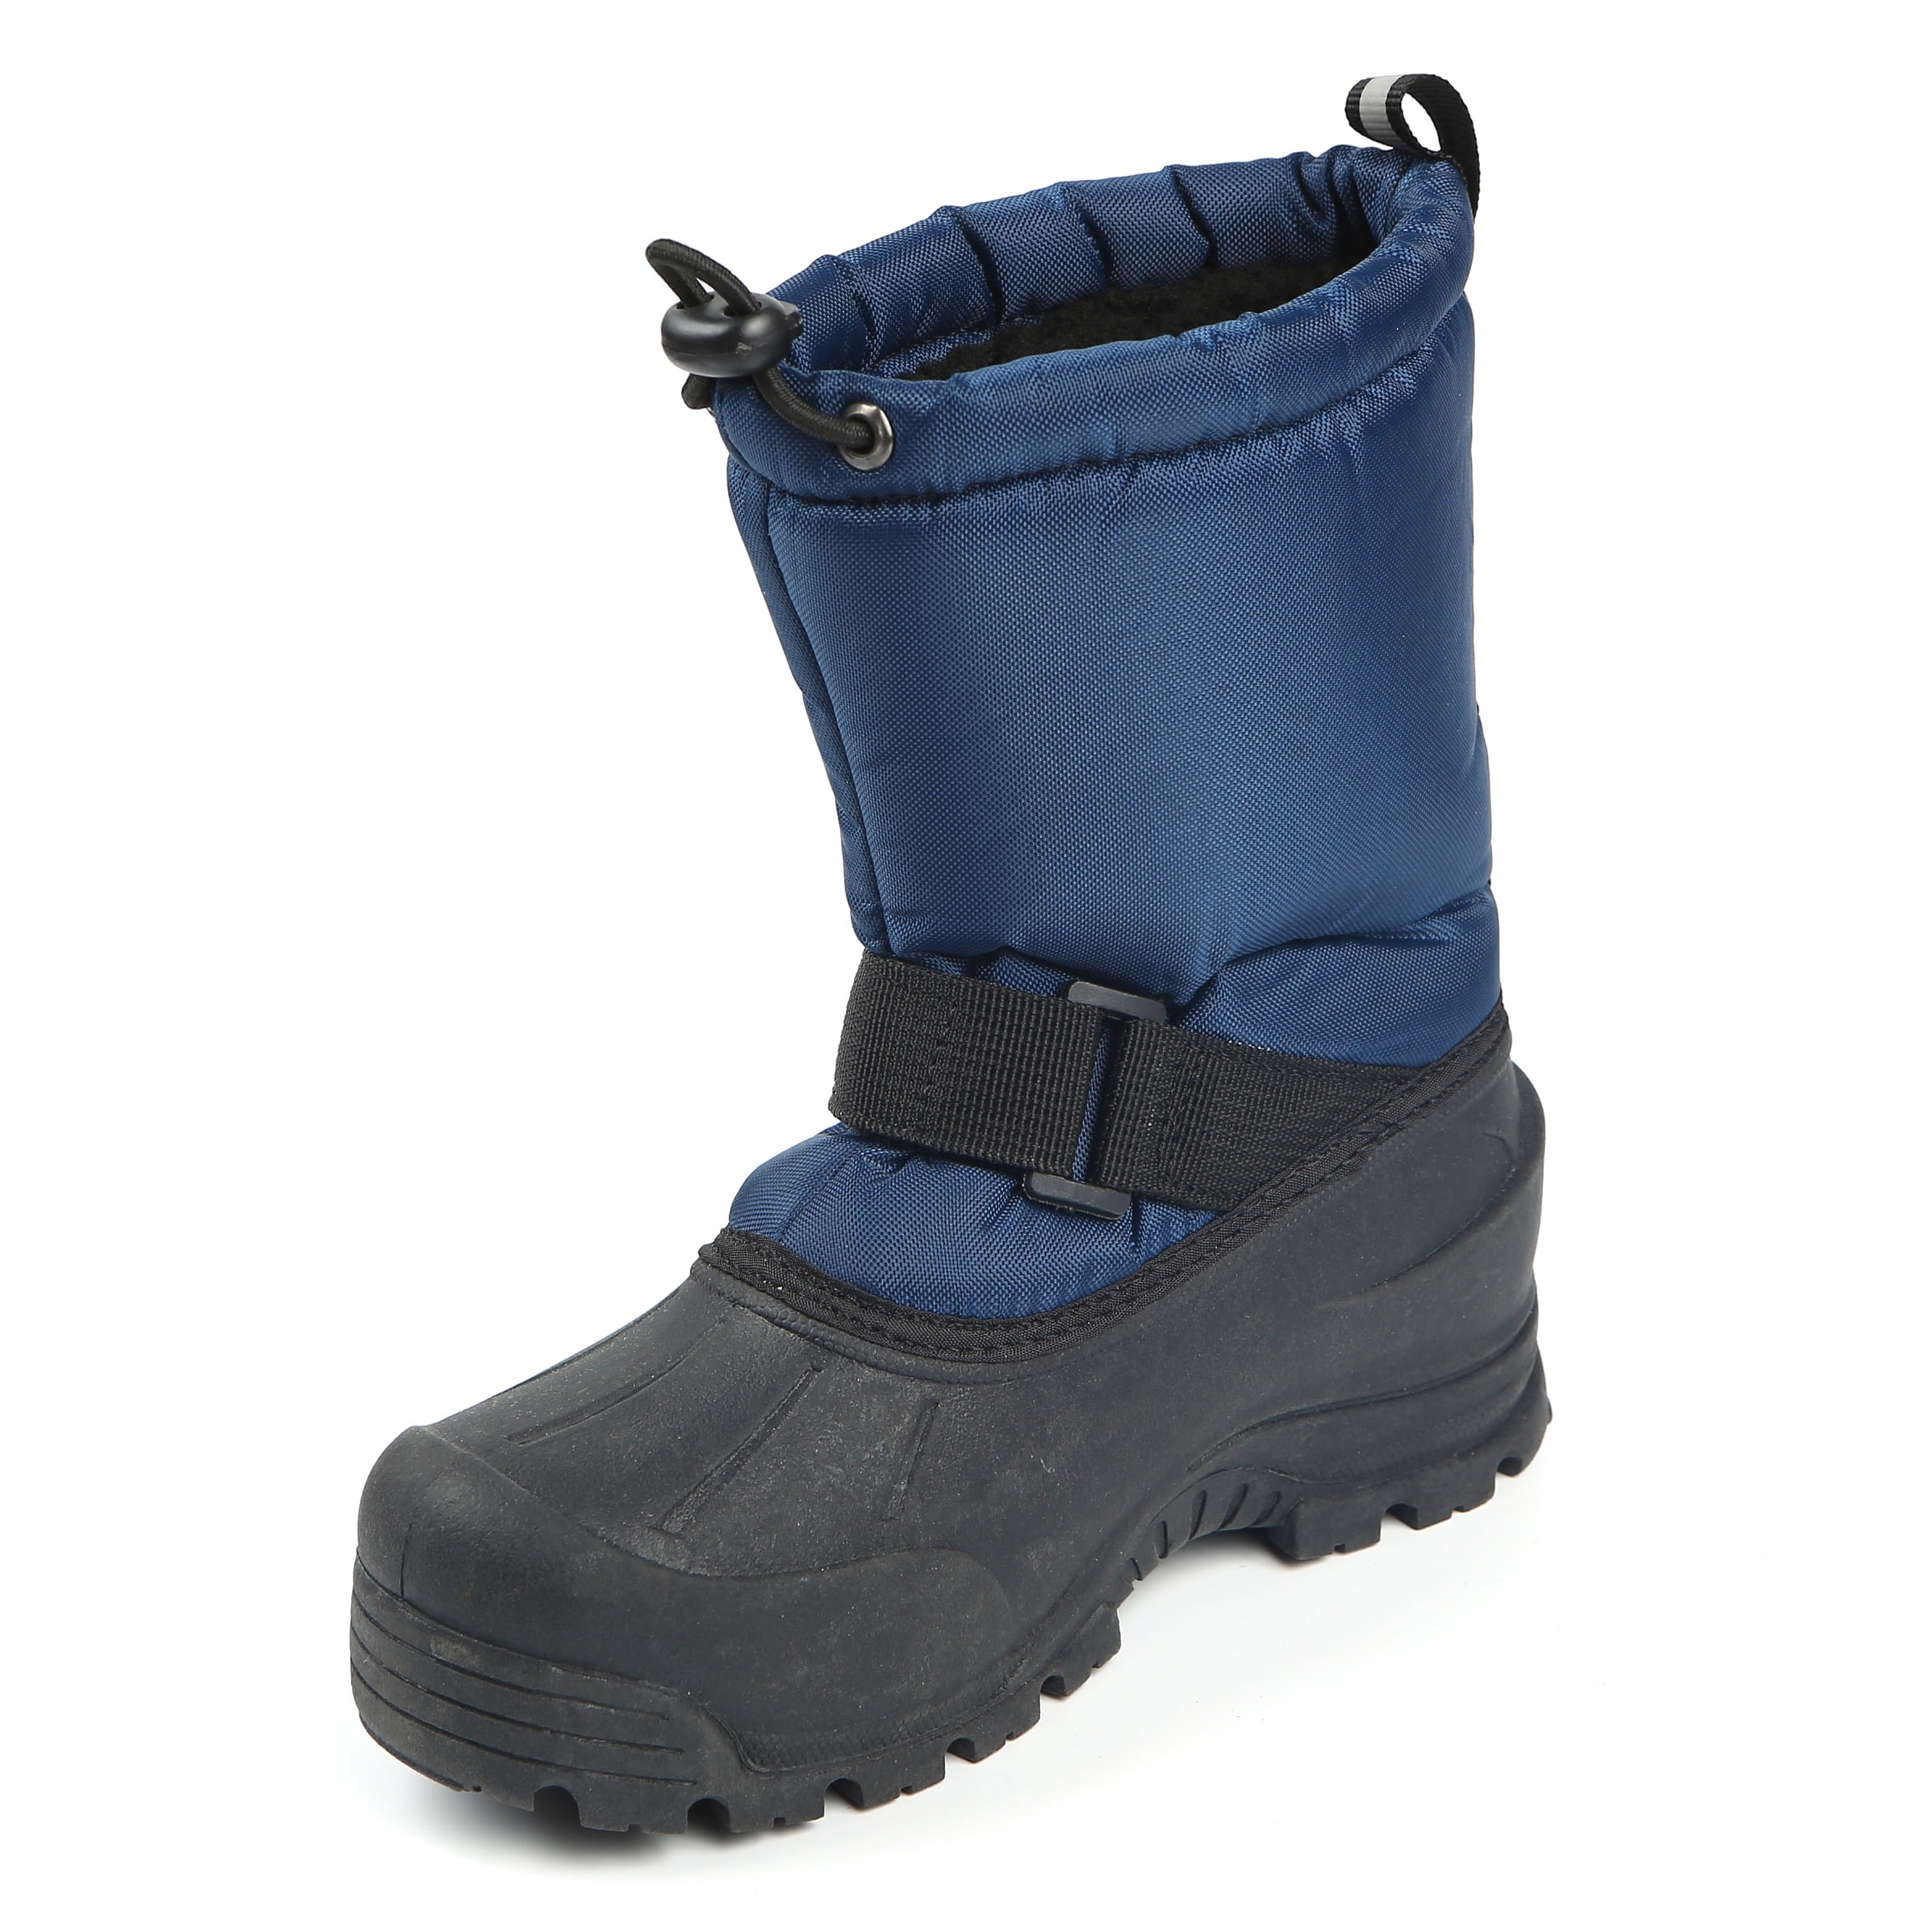 Northside - Northside Kids Frosty Insulated Winter Snow Boot Toddler